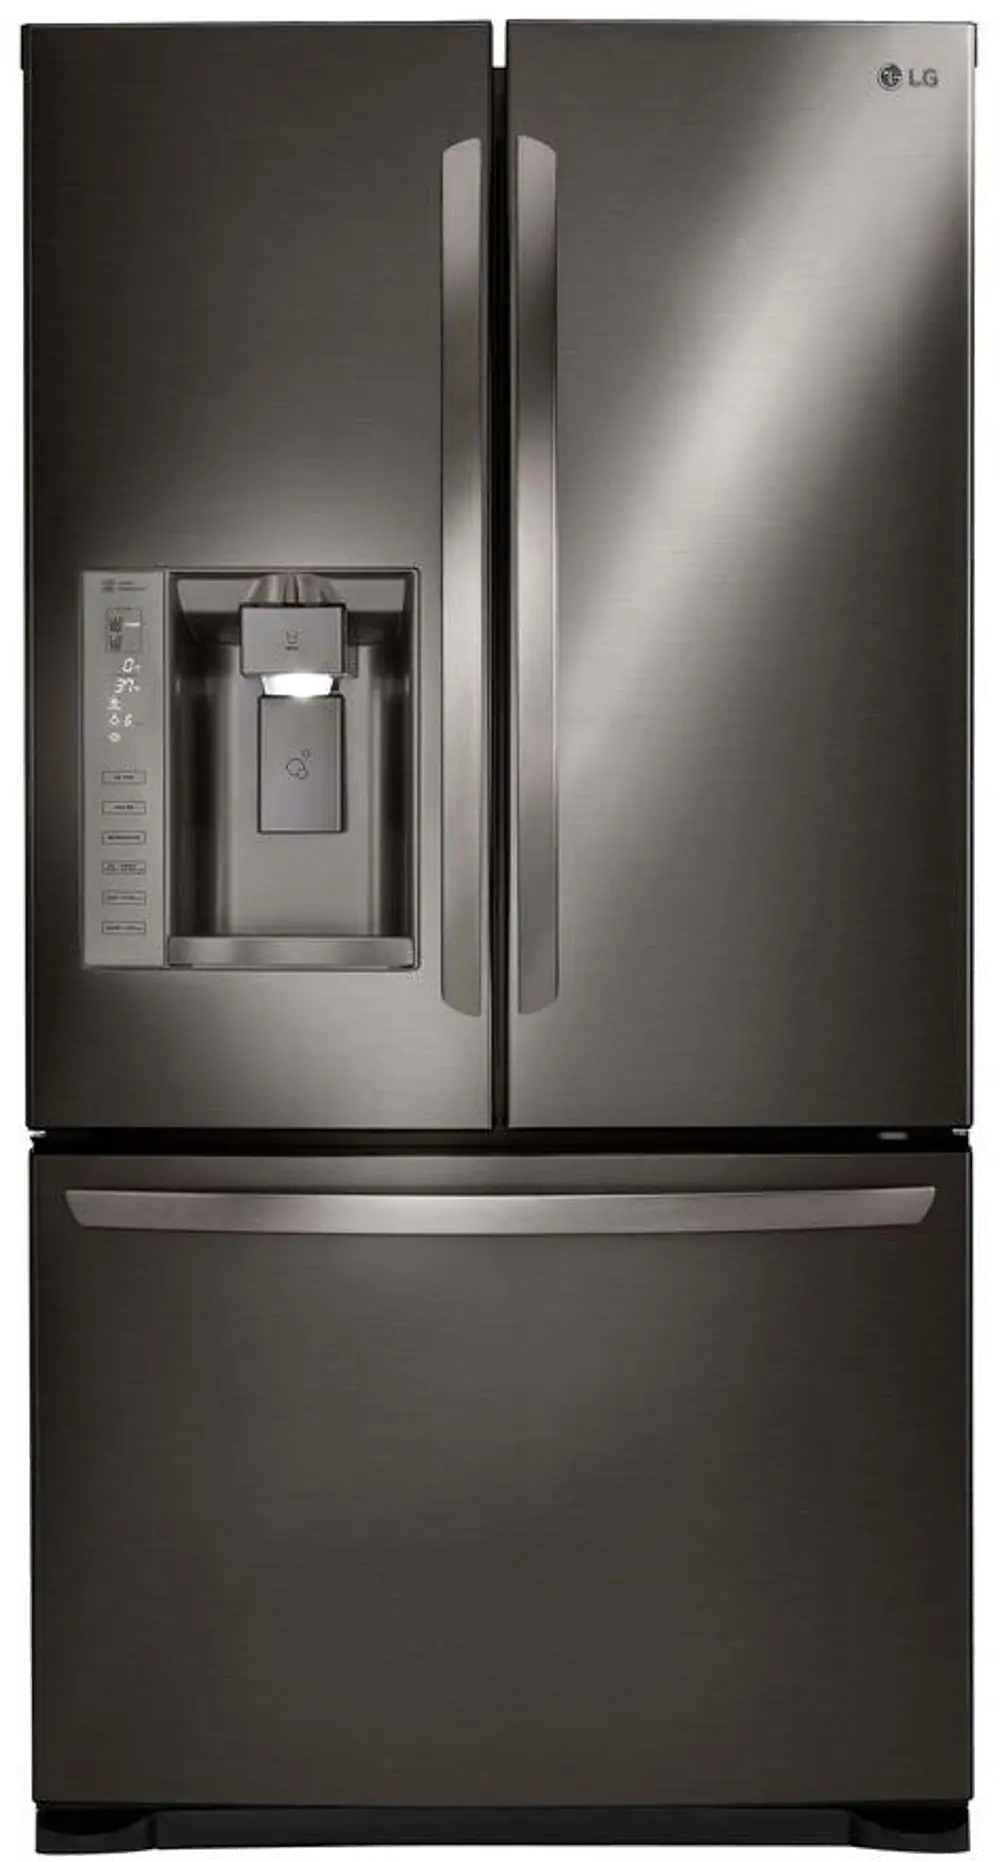 LFX25973D LG 24.1 cu. ft. French Door Refrigerator with Dual Ice Makers - 36 Inch Black Stainless Steel-1